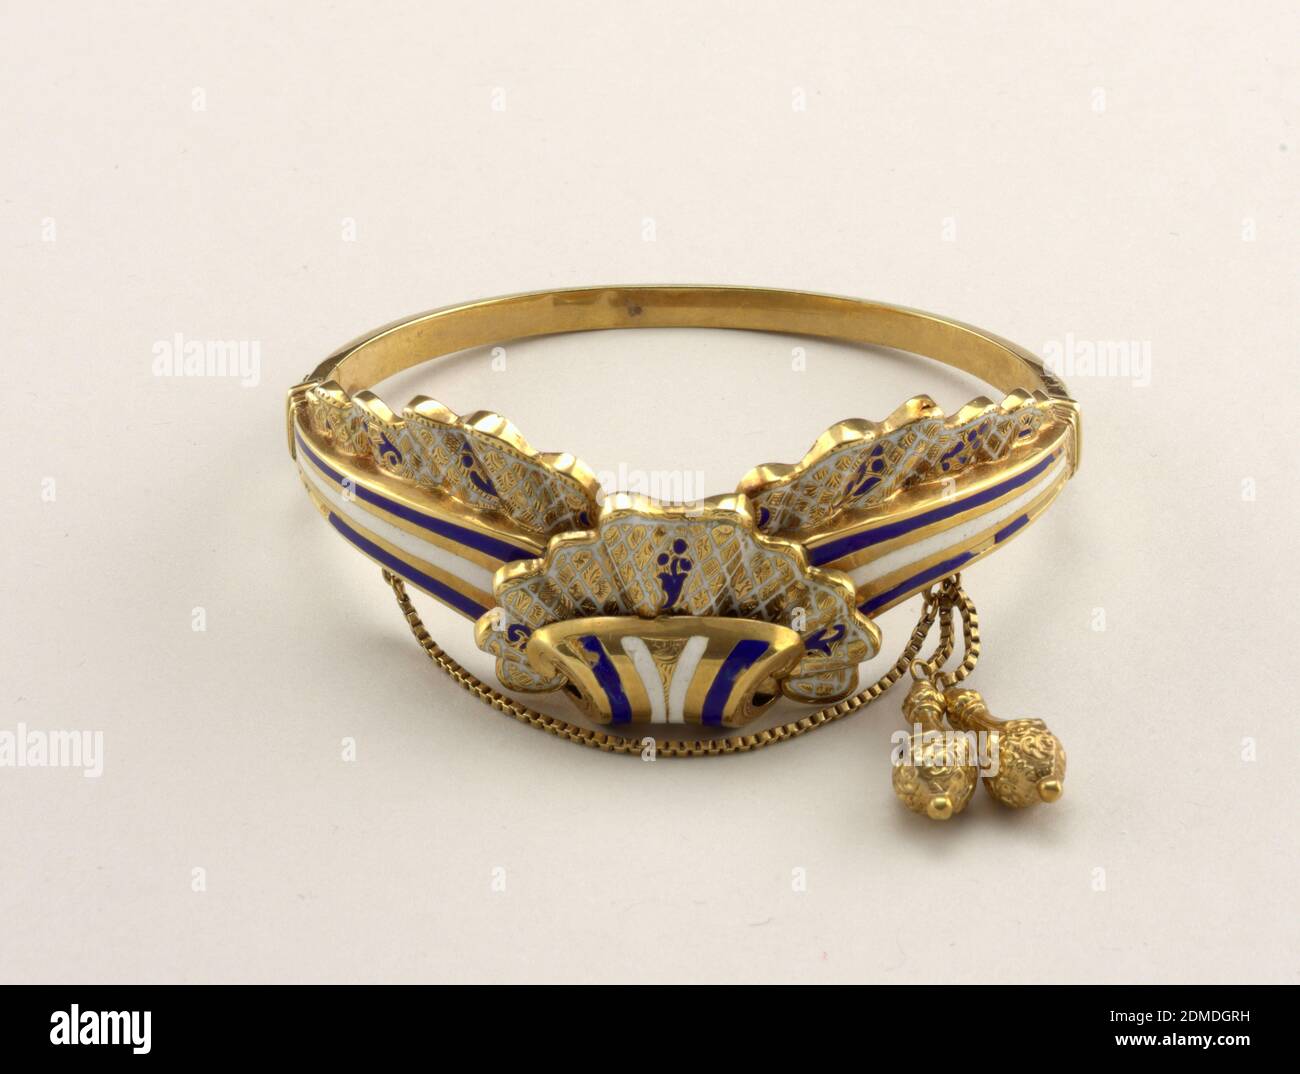 Bracelet, Gold, enamel, Hinged bracelet with clasp; design of scroll and lace frills; fine chain with two gold pendants., USA, mid-19th century, jewelry, Decorative Arts, Bracelet Stock Photo